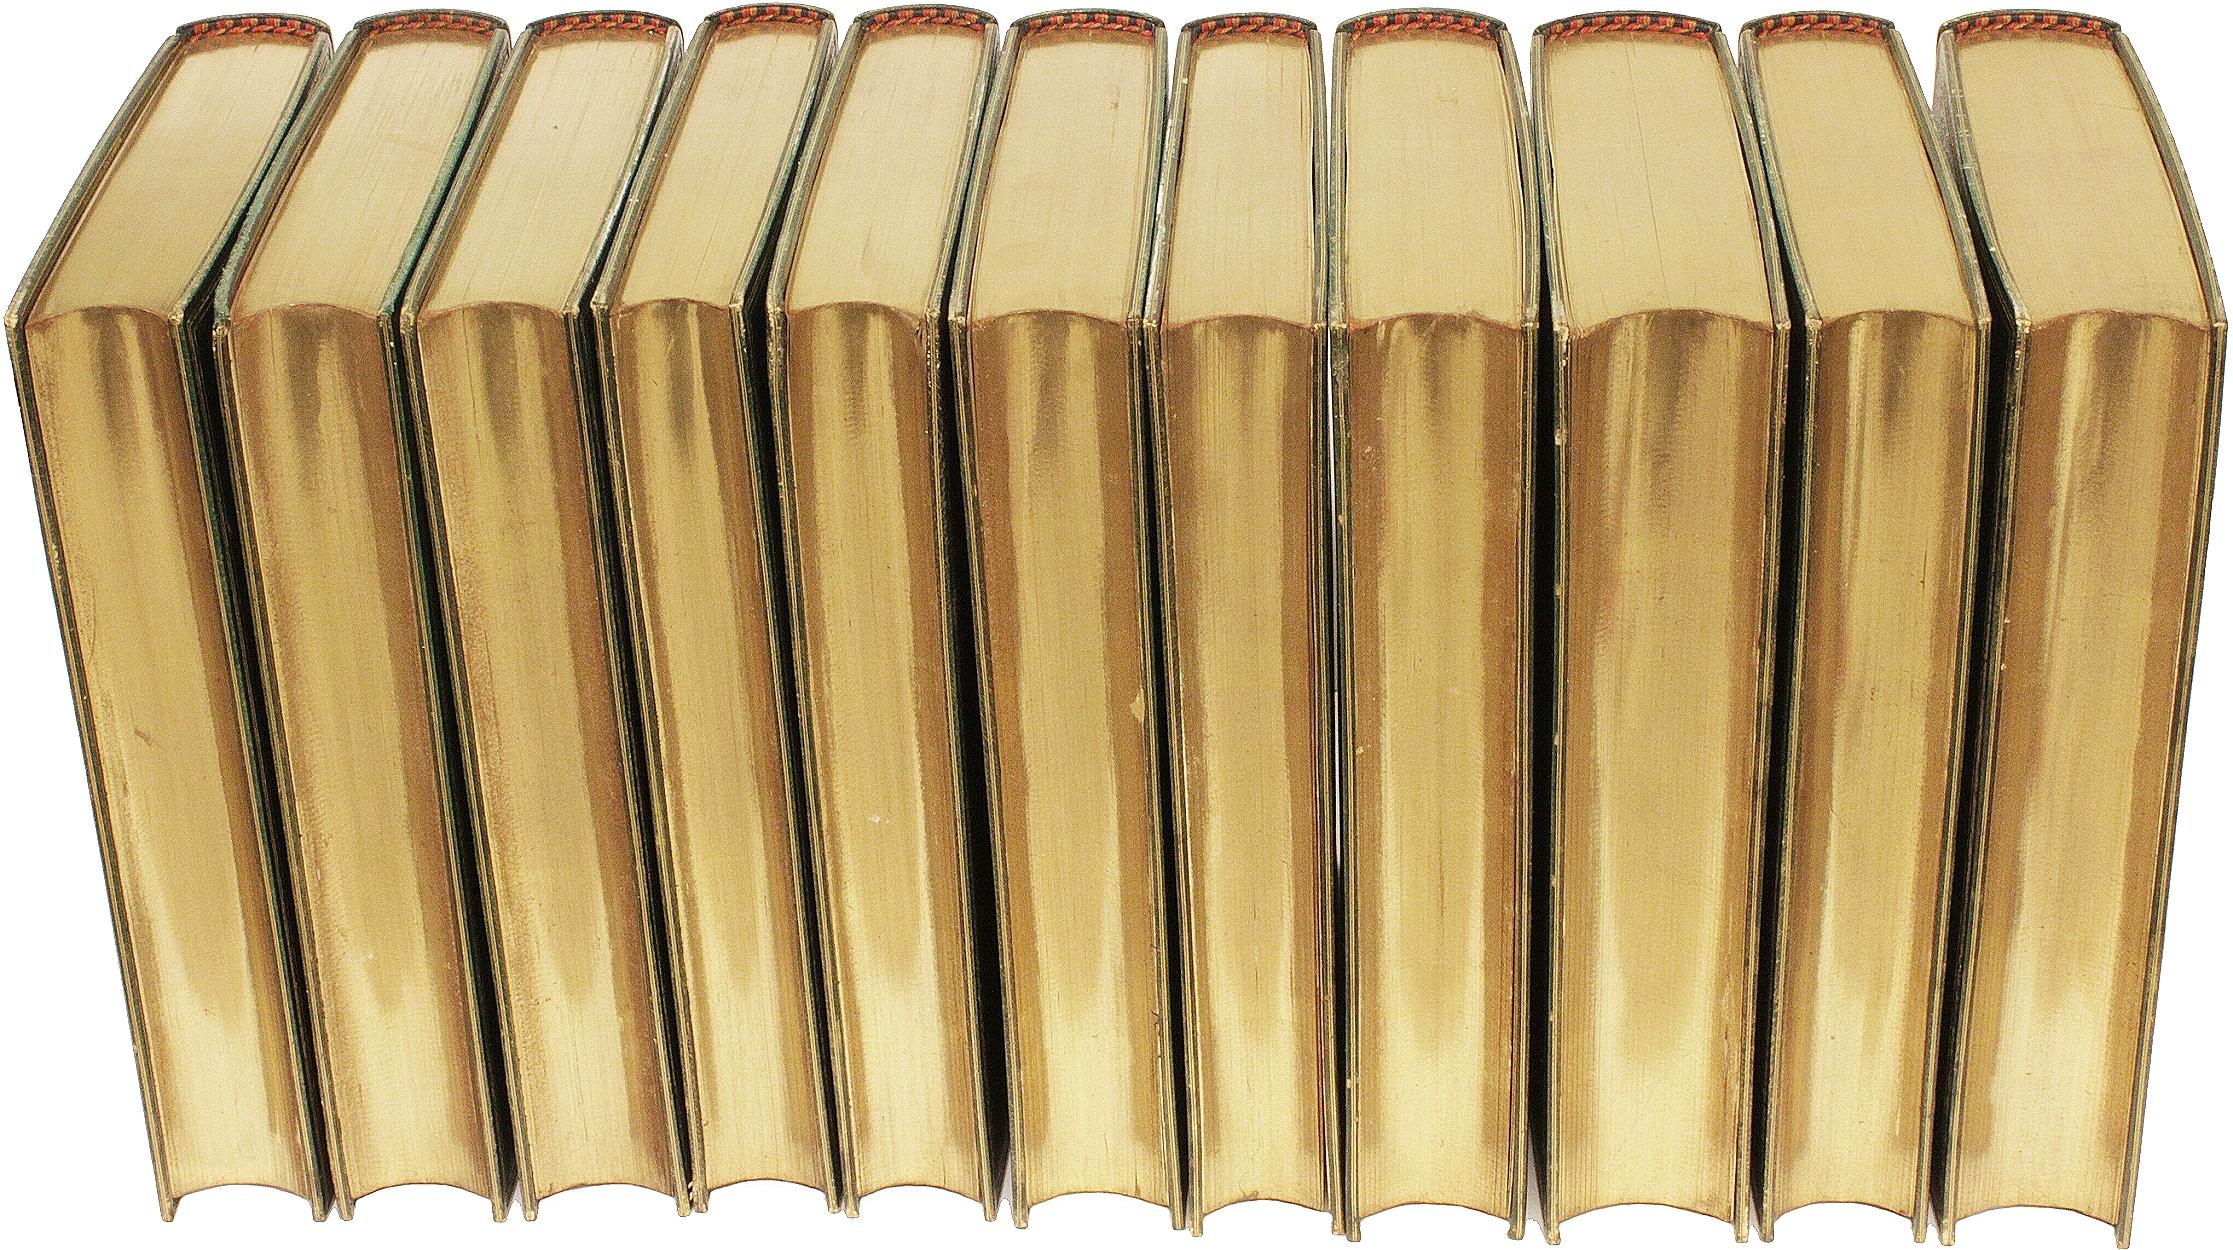 Leather Complete Writings of Henry Wadsworth Longfellow - LARGE PAPER EDITION - 11 VOLS For Sale